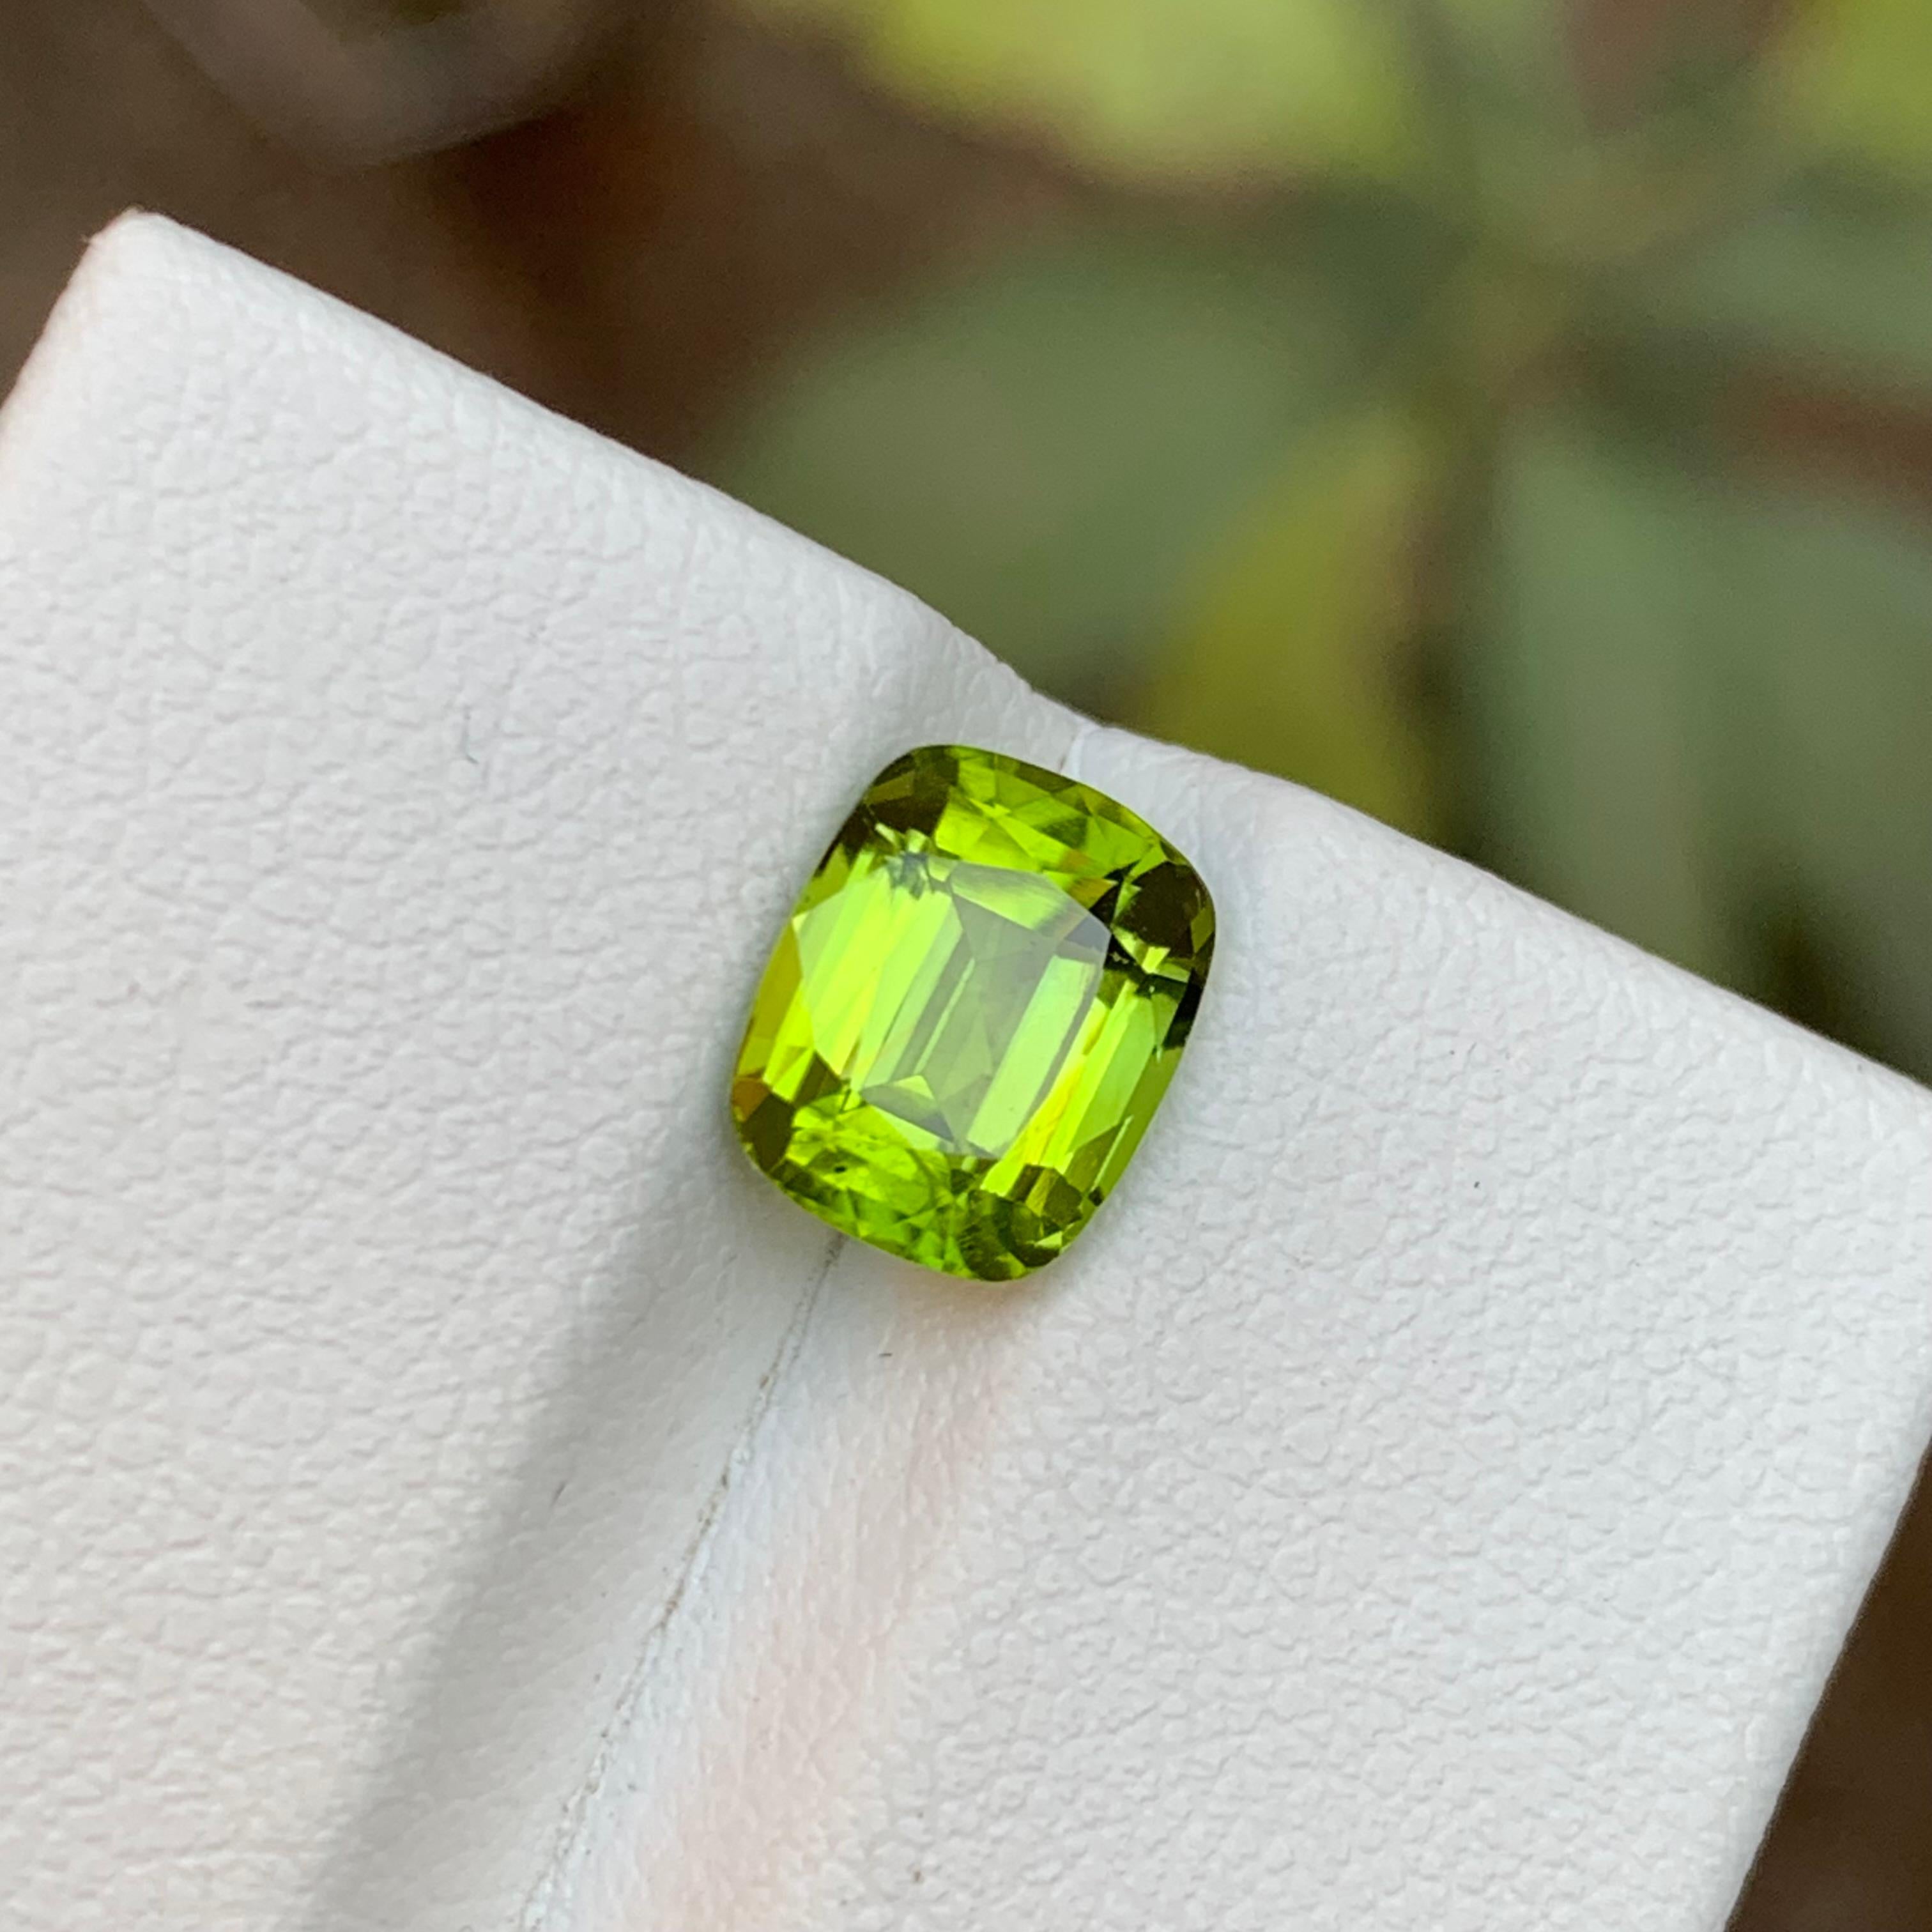 GEMSTONE TYPE: Peridot
PIECE(S): 1
WEIGHT: 2.30 Carats
SHAPE: Cushion 
SIZE (MM): 8.30 x 6.80 x 4.78
COLOR: Green
CLARITY: Eye Clean
TREATMENT: None
ORIGIN: Pakistan 
CERTIFICATE: On demand

Embrace the beauty of nature with this captivating 2.30